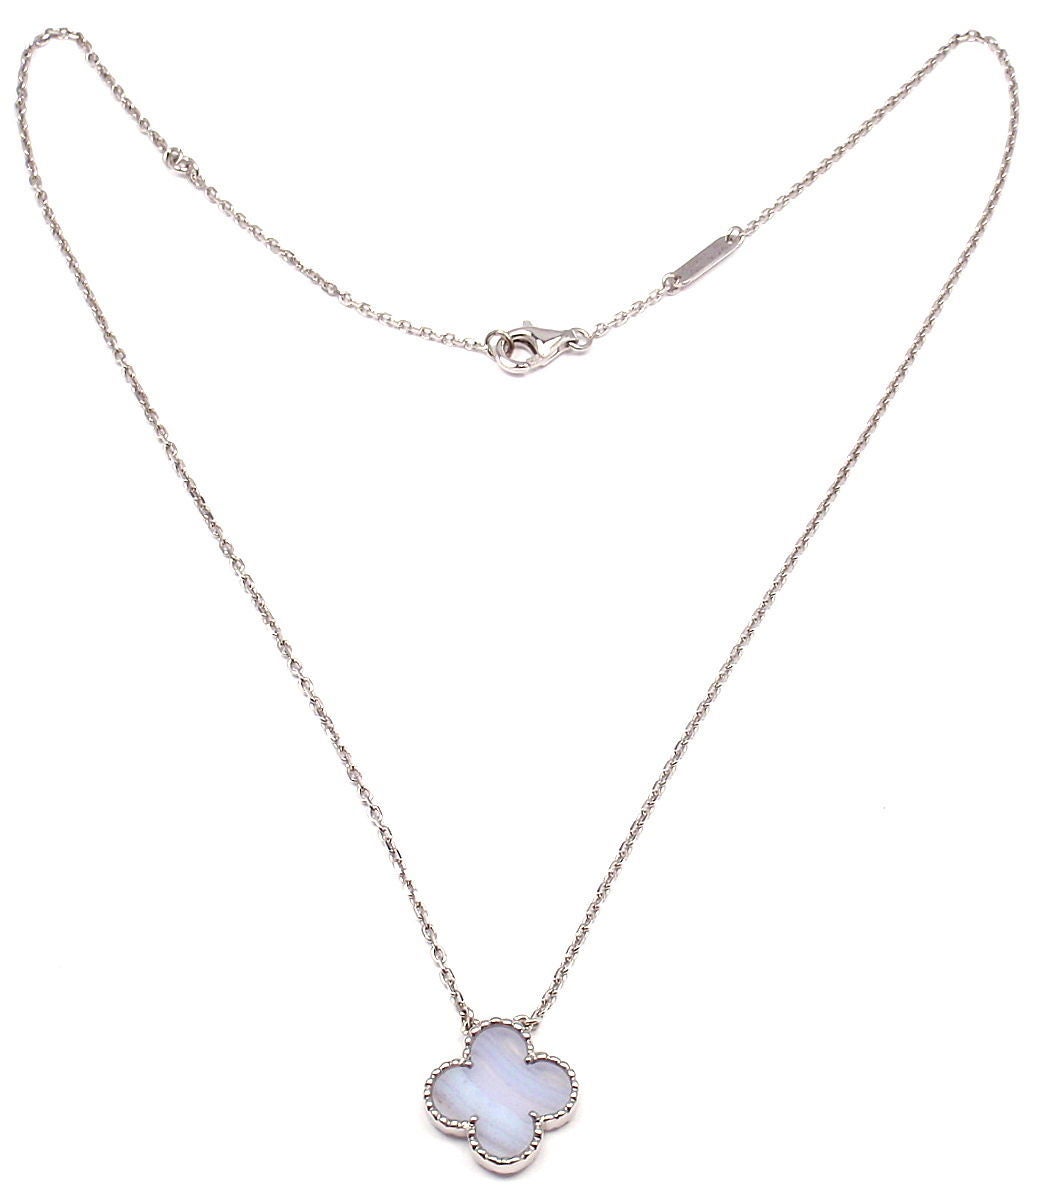 18k White Gold Vintage Alhambra Chalcedony Pendant Necklace by Van Cleef & Arpels. 
With 1 chalcedony stone: 15mm. 

Details: 
Length: 17